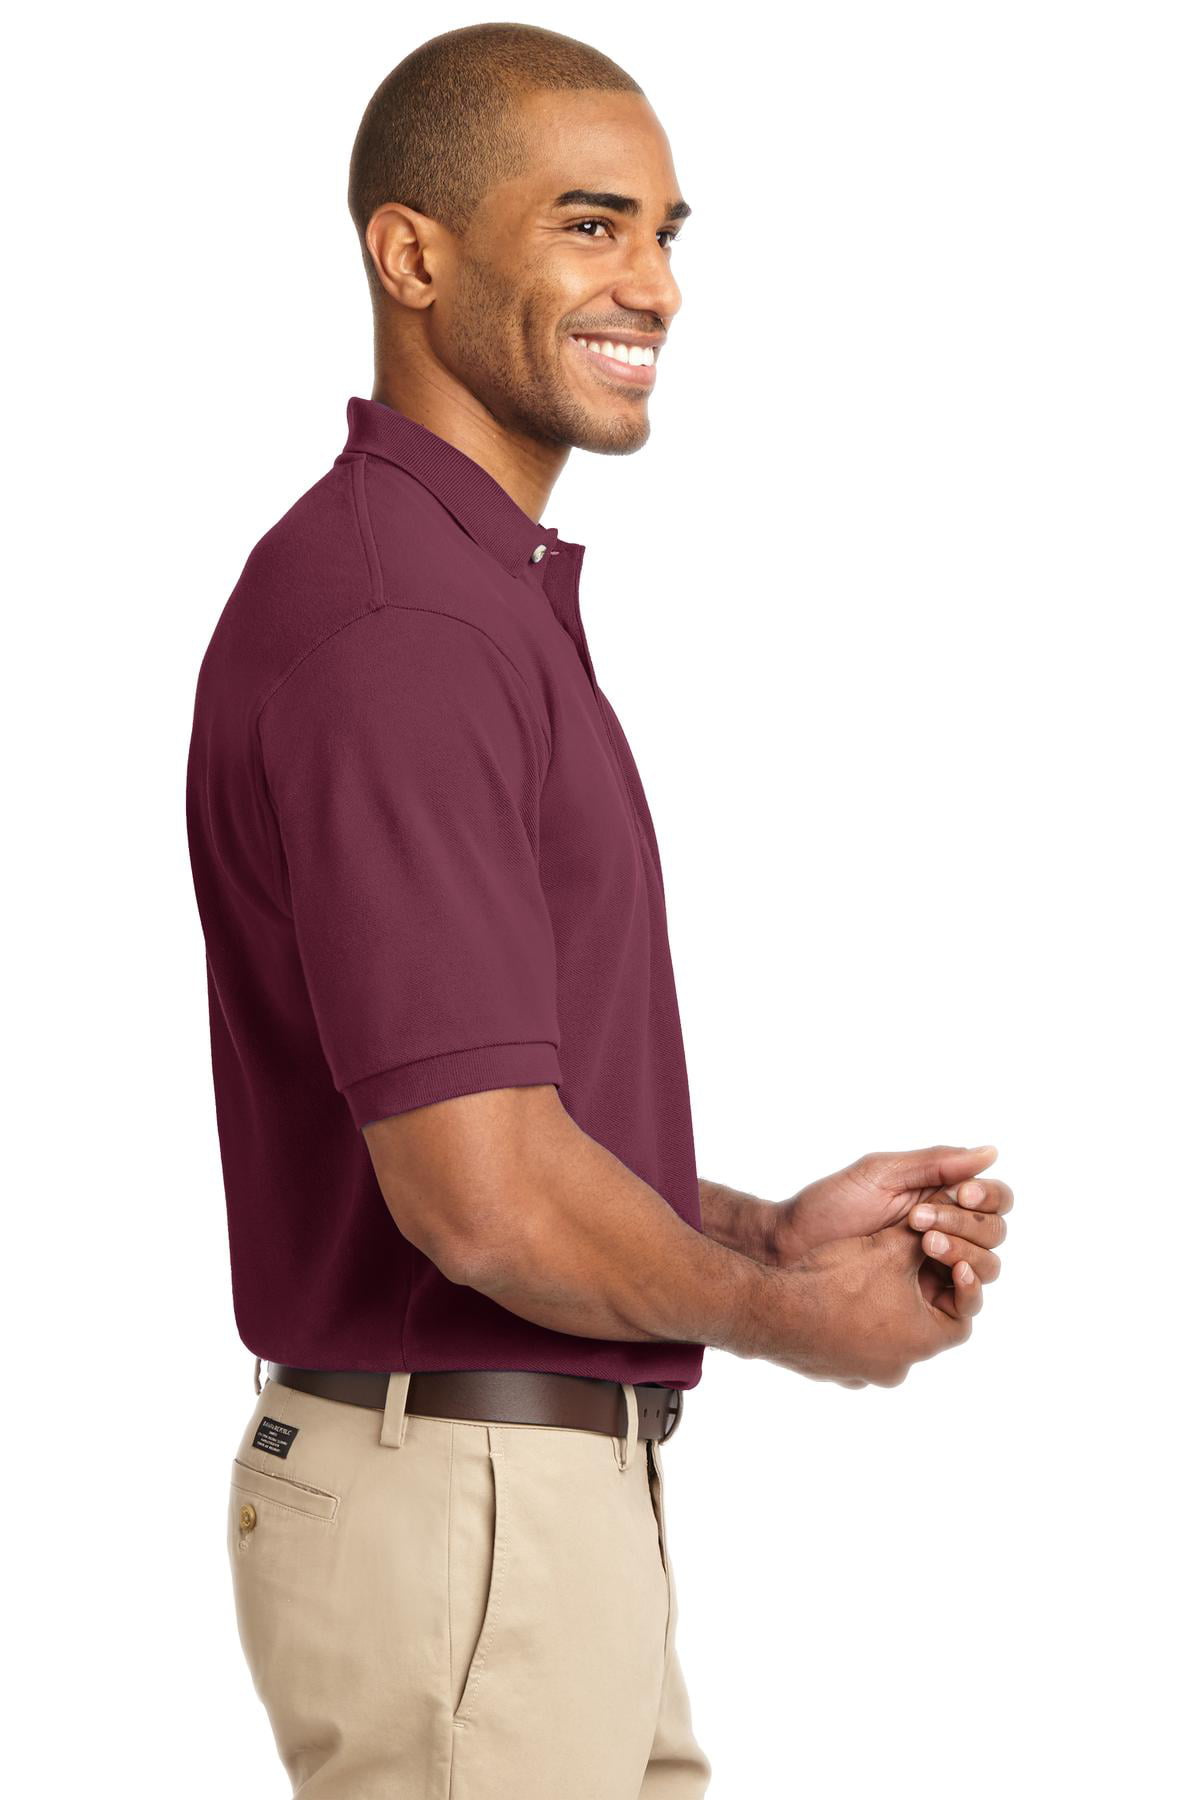 TLK420 Mens Port Authority Tall Pique Knit Polo 